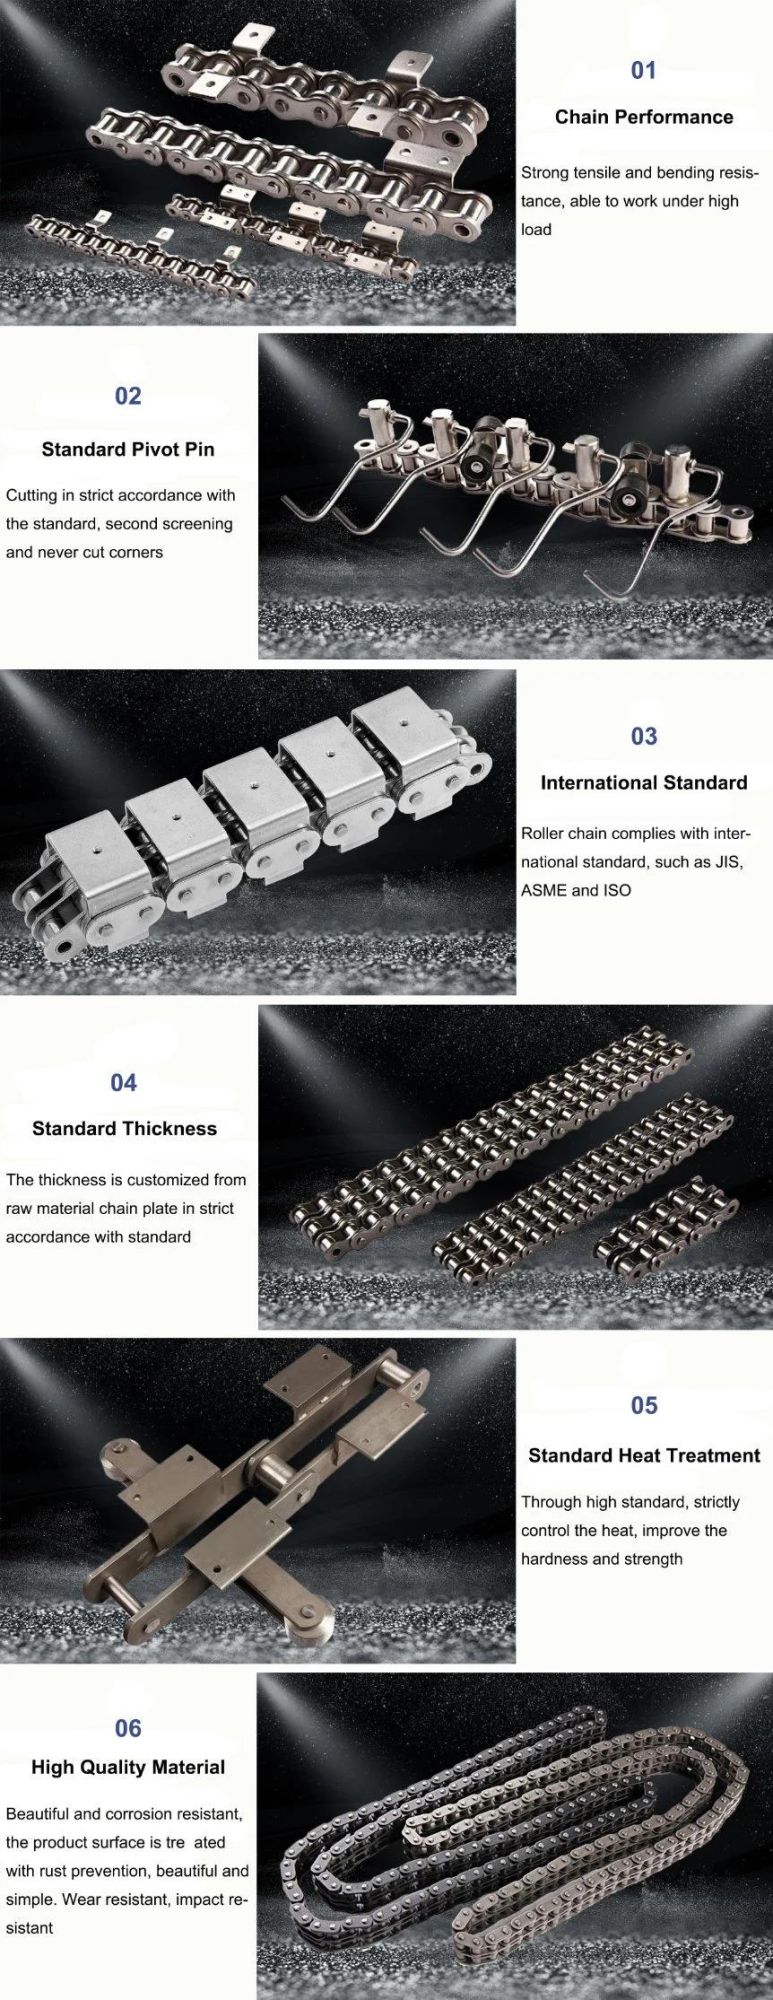 Wear Resistant Stainless Steel Stainless Steel Forging Lumber Attachment Conveyor Chain